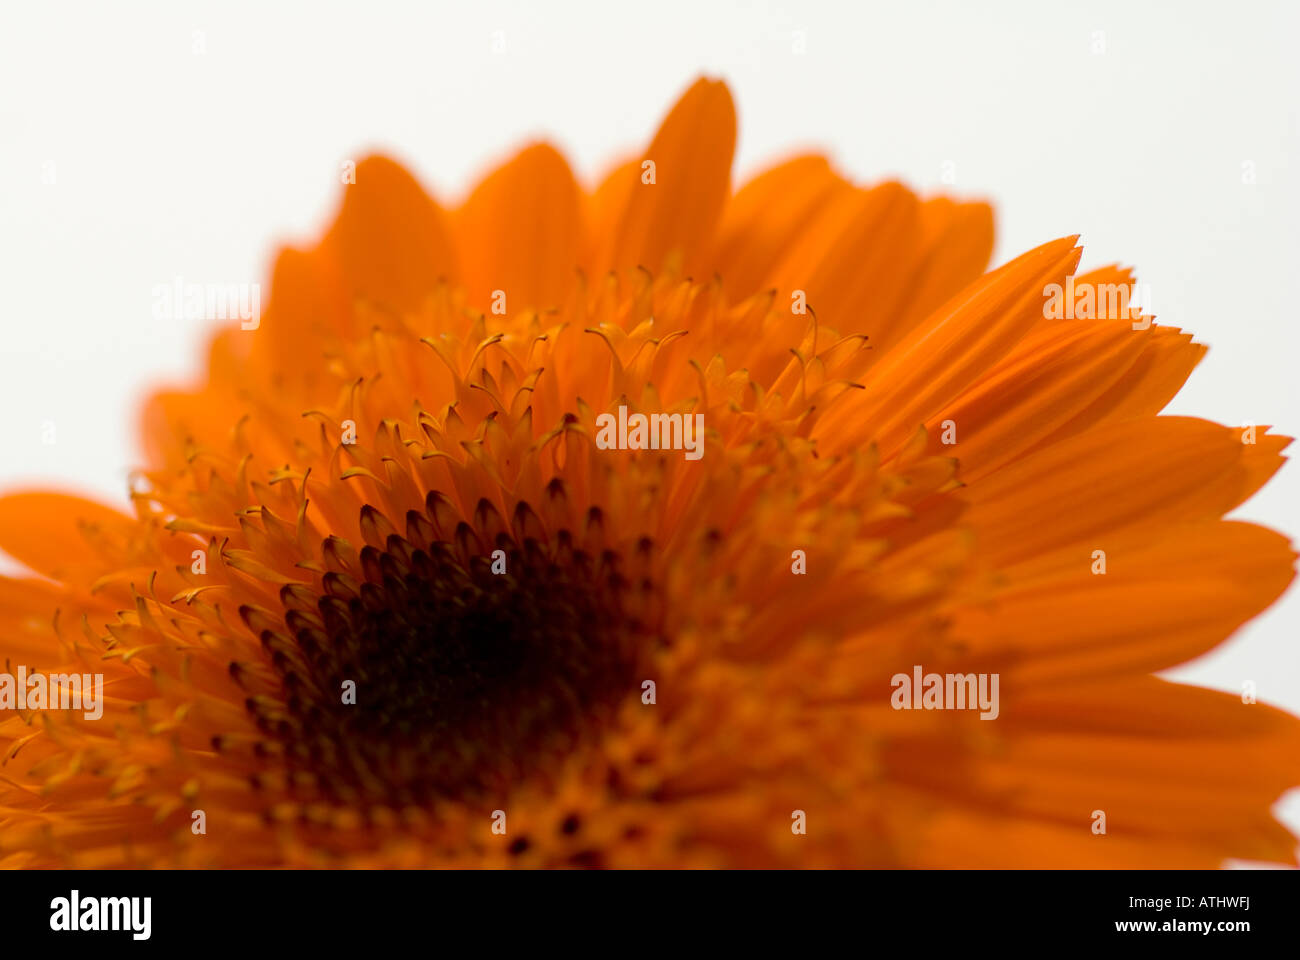 Calendula Officinalis flowers which have medicinal uses and are often used to produce medications to treat skin conditions Stock Photo